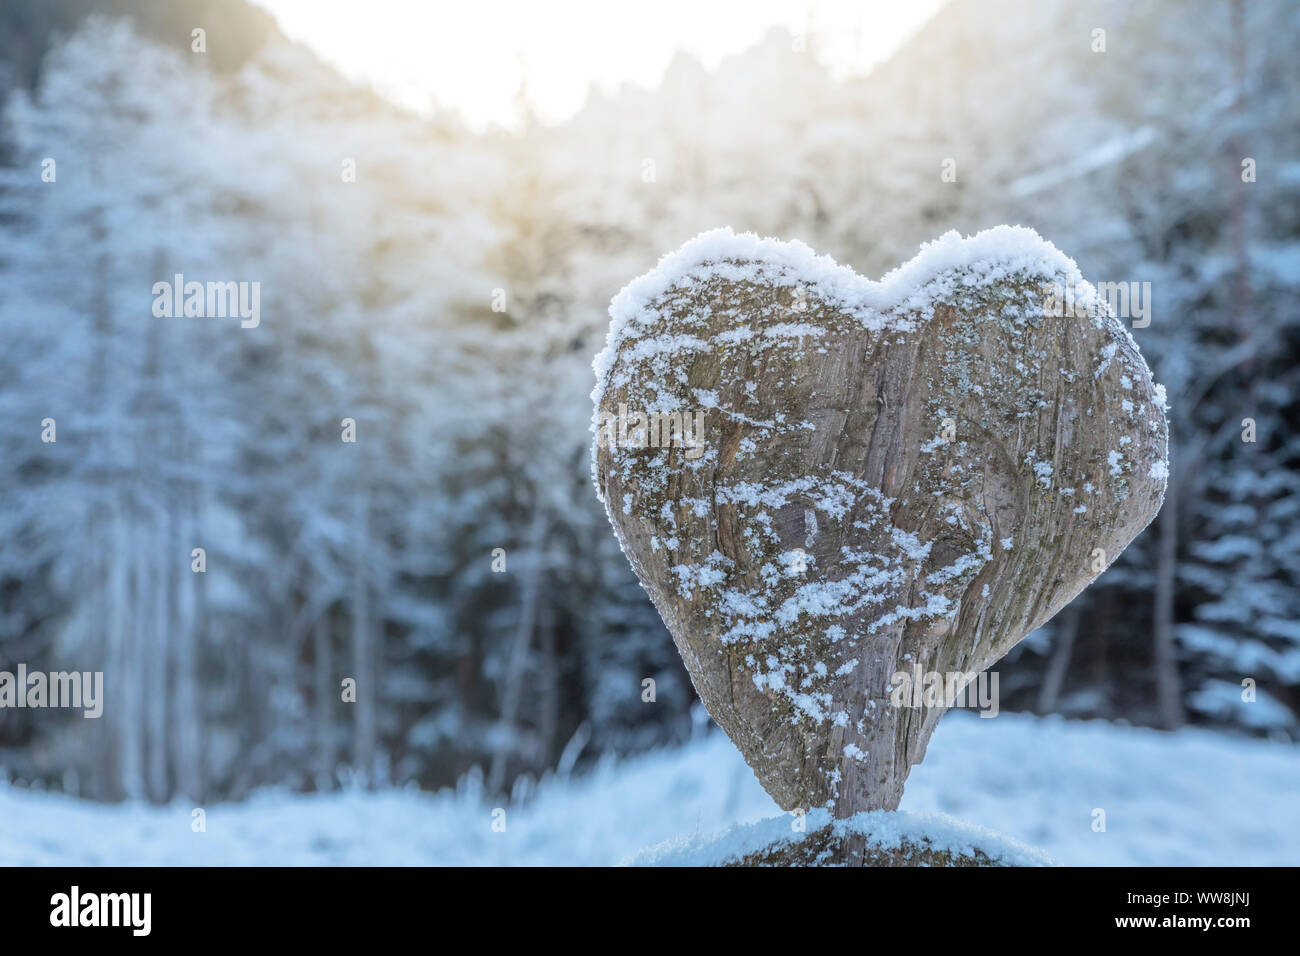 Wooden sculpture in the shape of a heart in a snowy winter forest Stock Photo